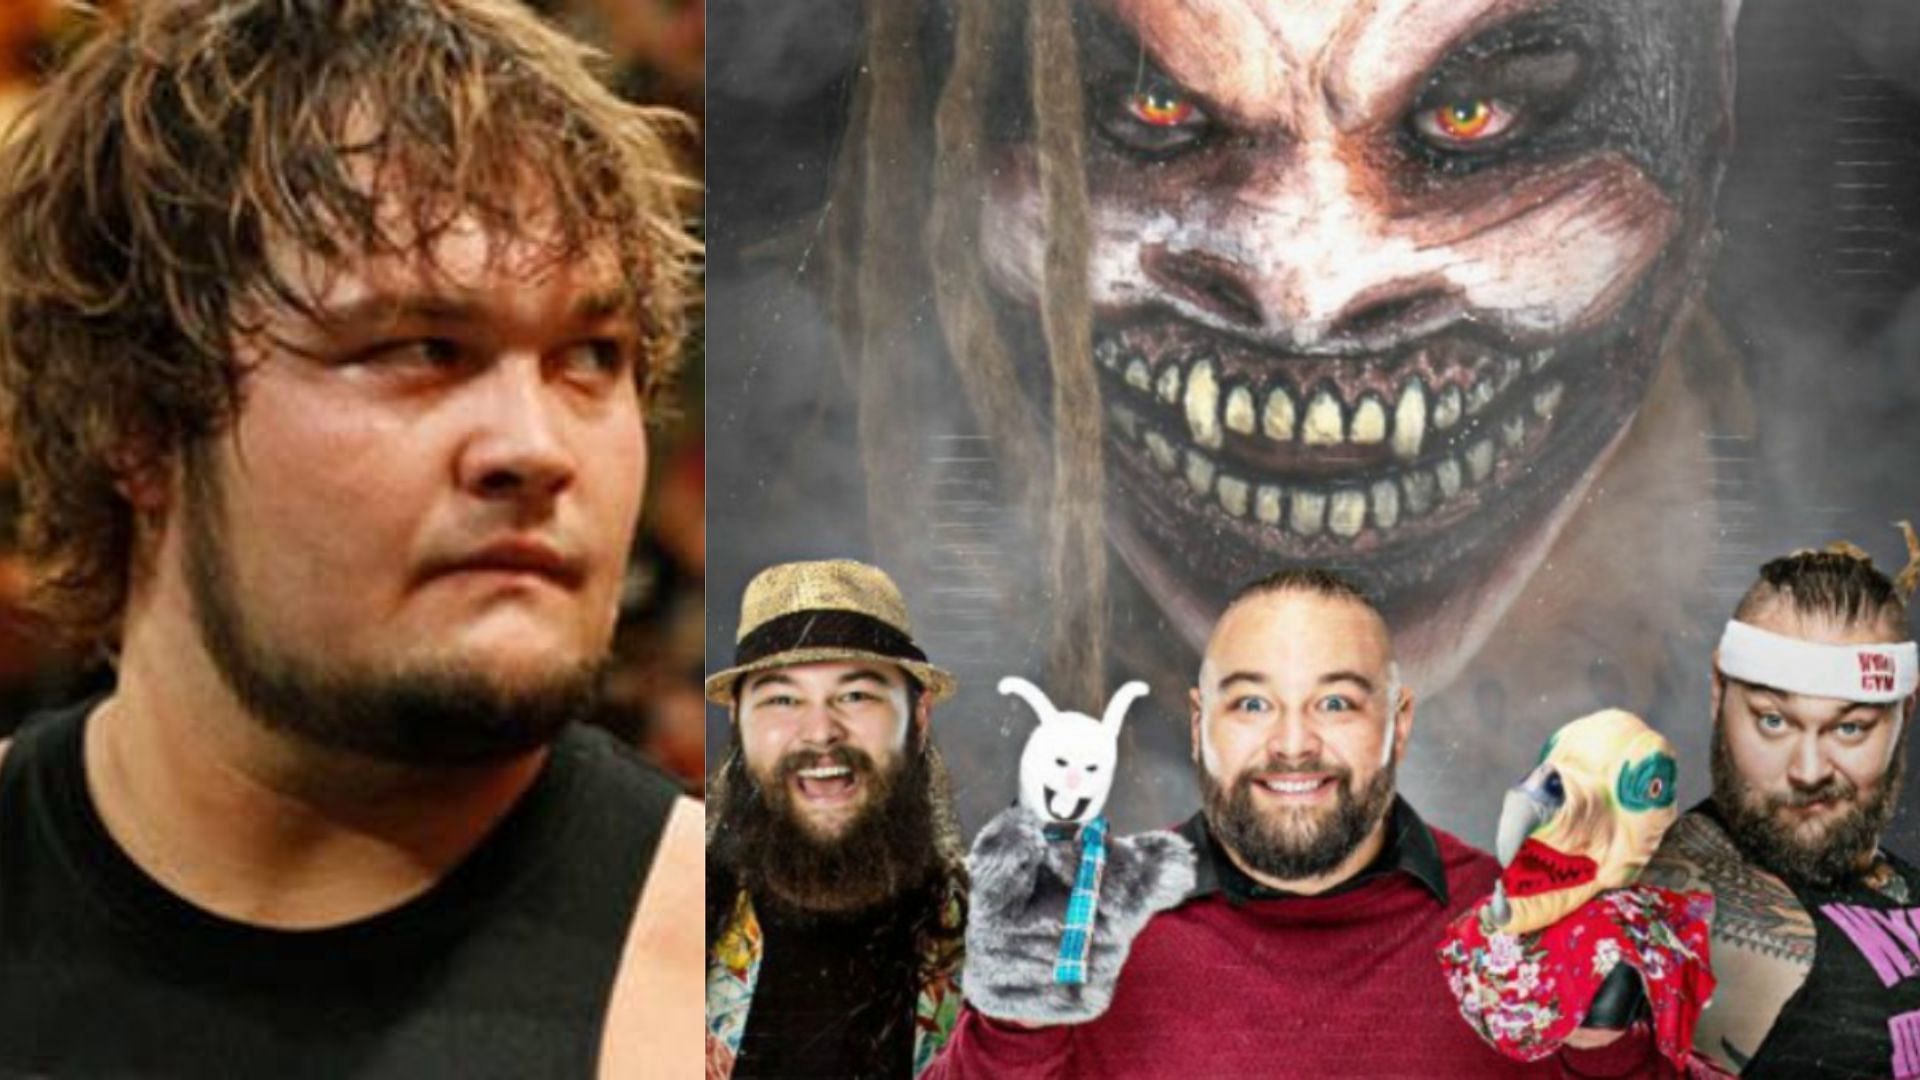 Bray Wyatt has portrayed multiple characters in WWE, most of which were remarkable